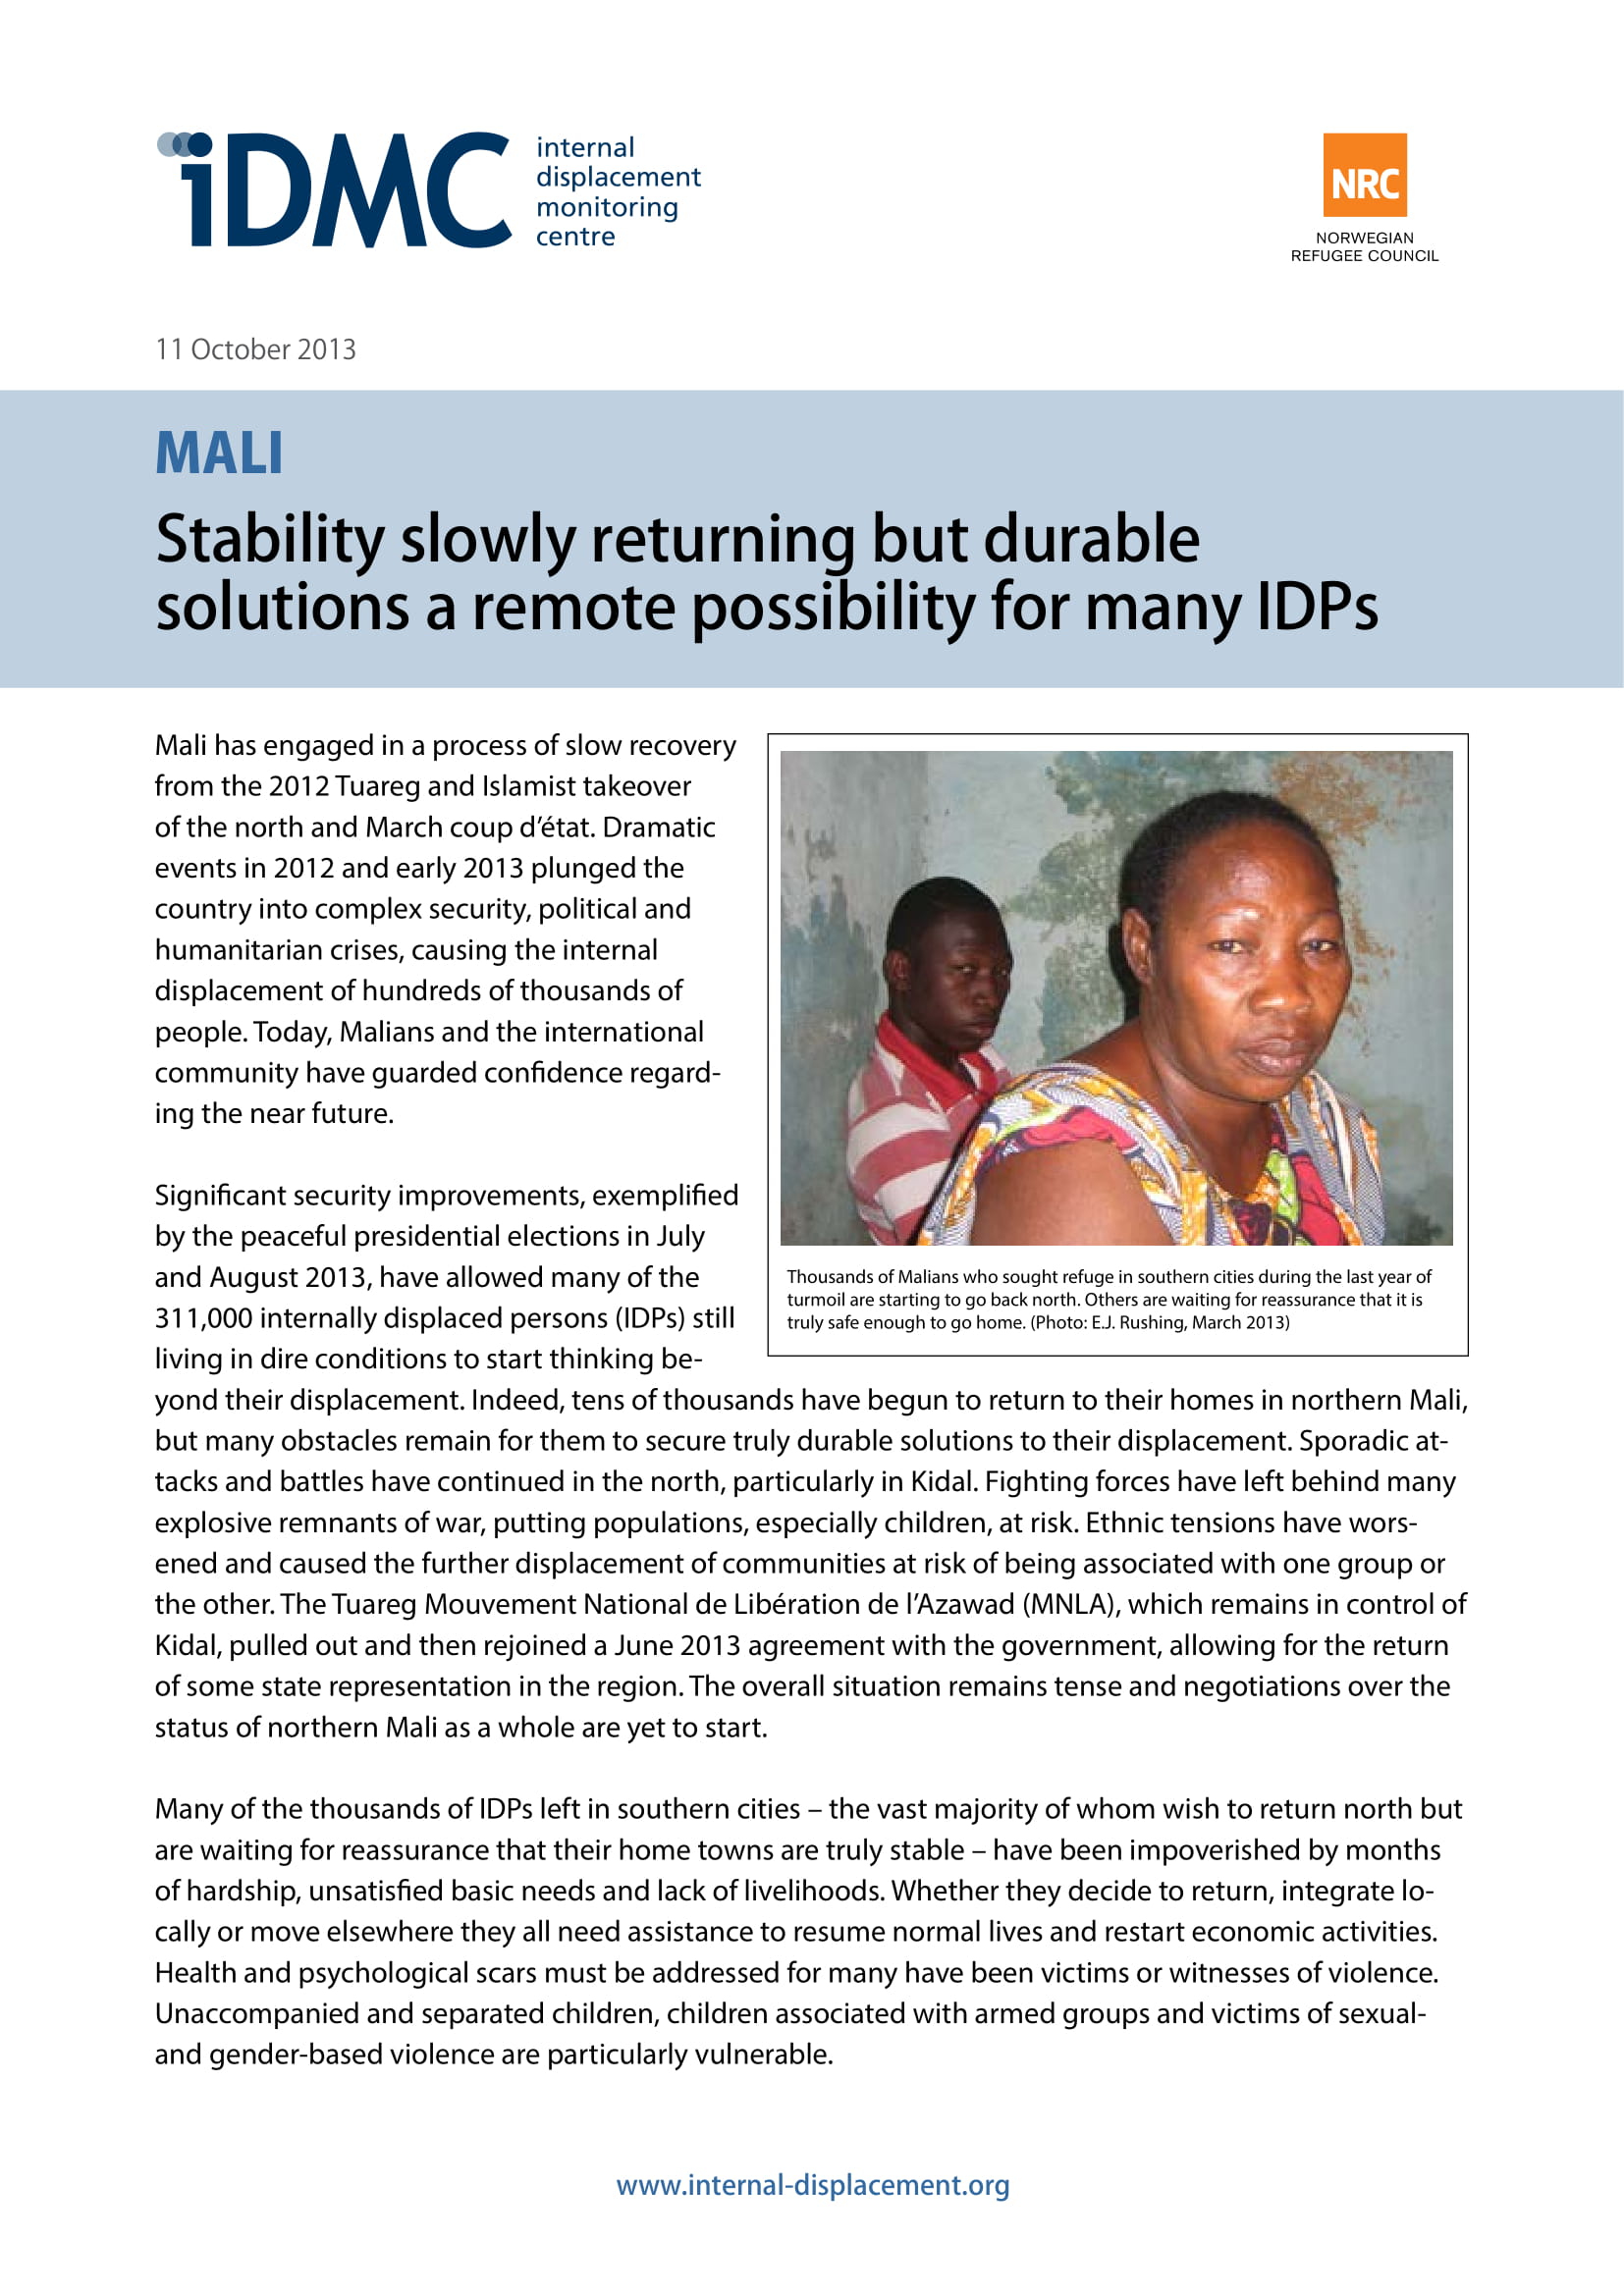 Mali: Stability slowly returning but durable solutions a remote possibility for many IDPs